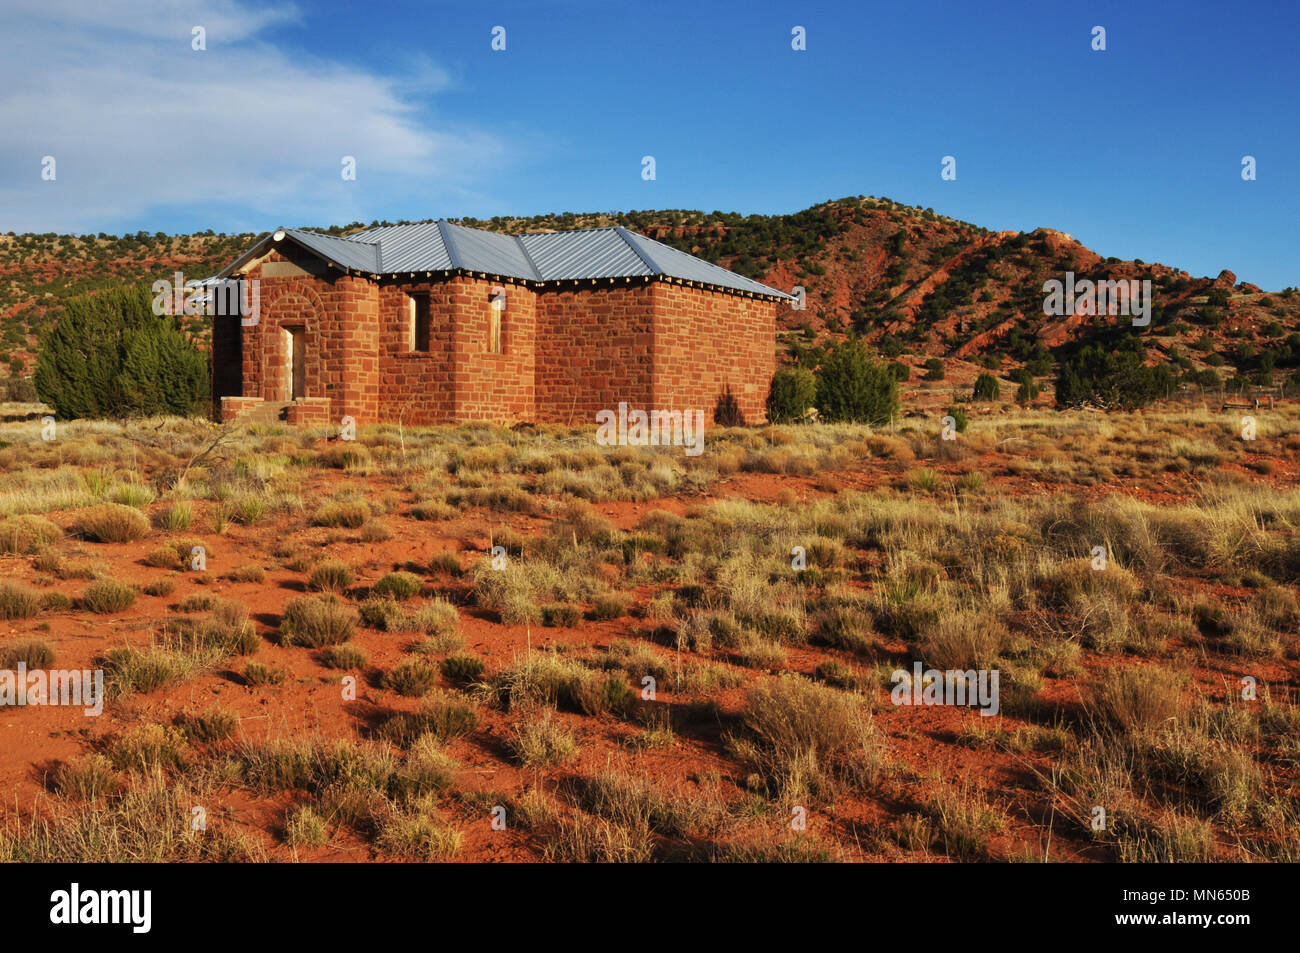 An old stone schoolhouse stands against a colorful landscape in the Route 66 town of Cuervo, New Mexico. Stock Photo